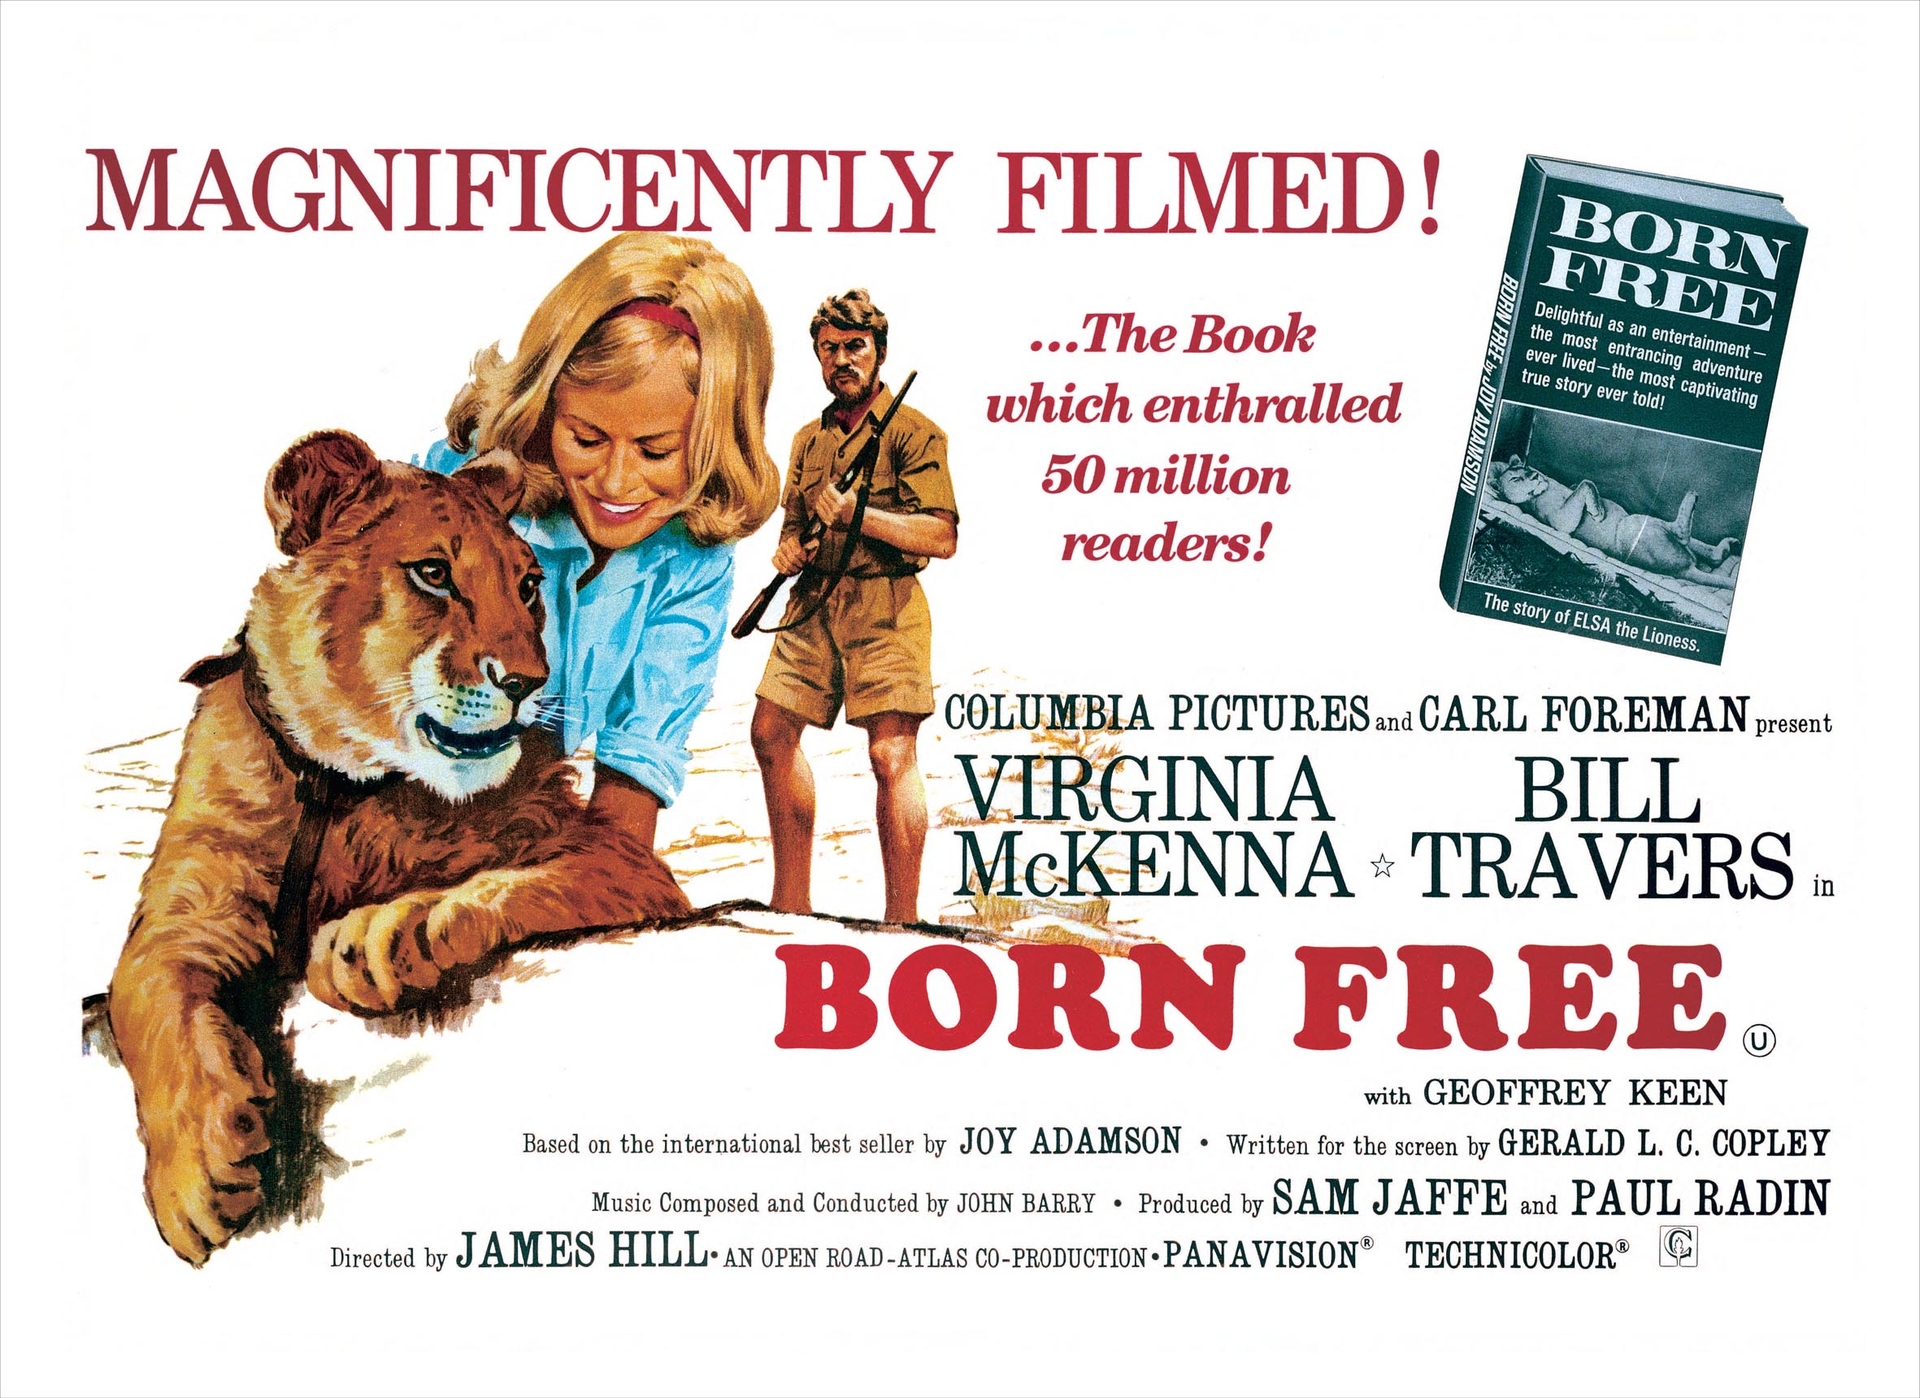 Elsa the lioness was depicted in 1966 film Born Free, starring the charity's co-founders.